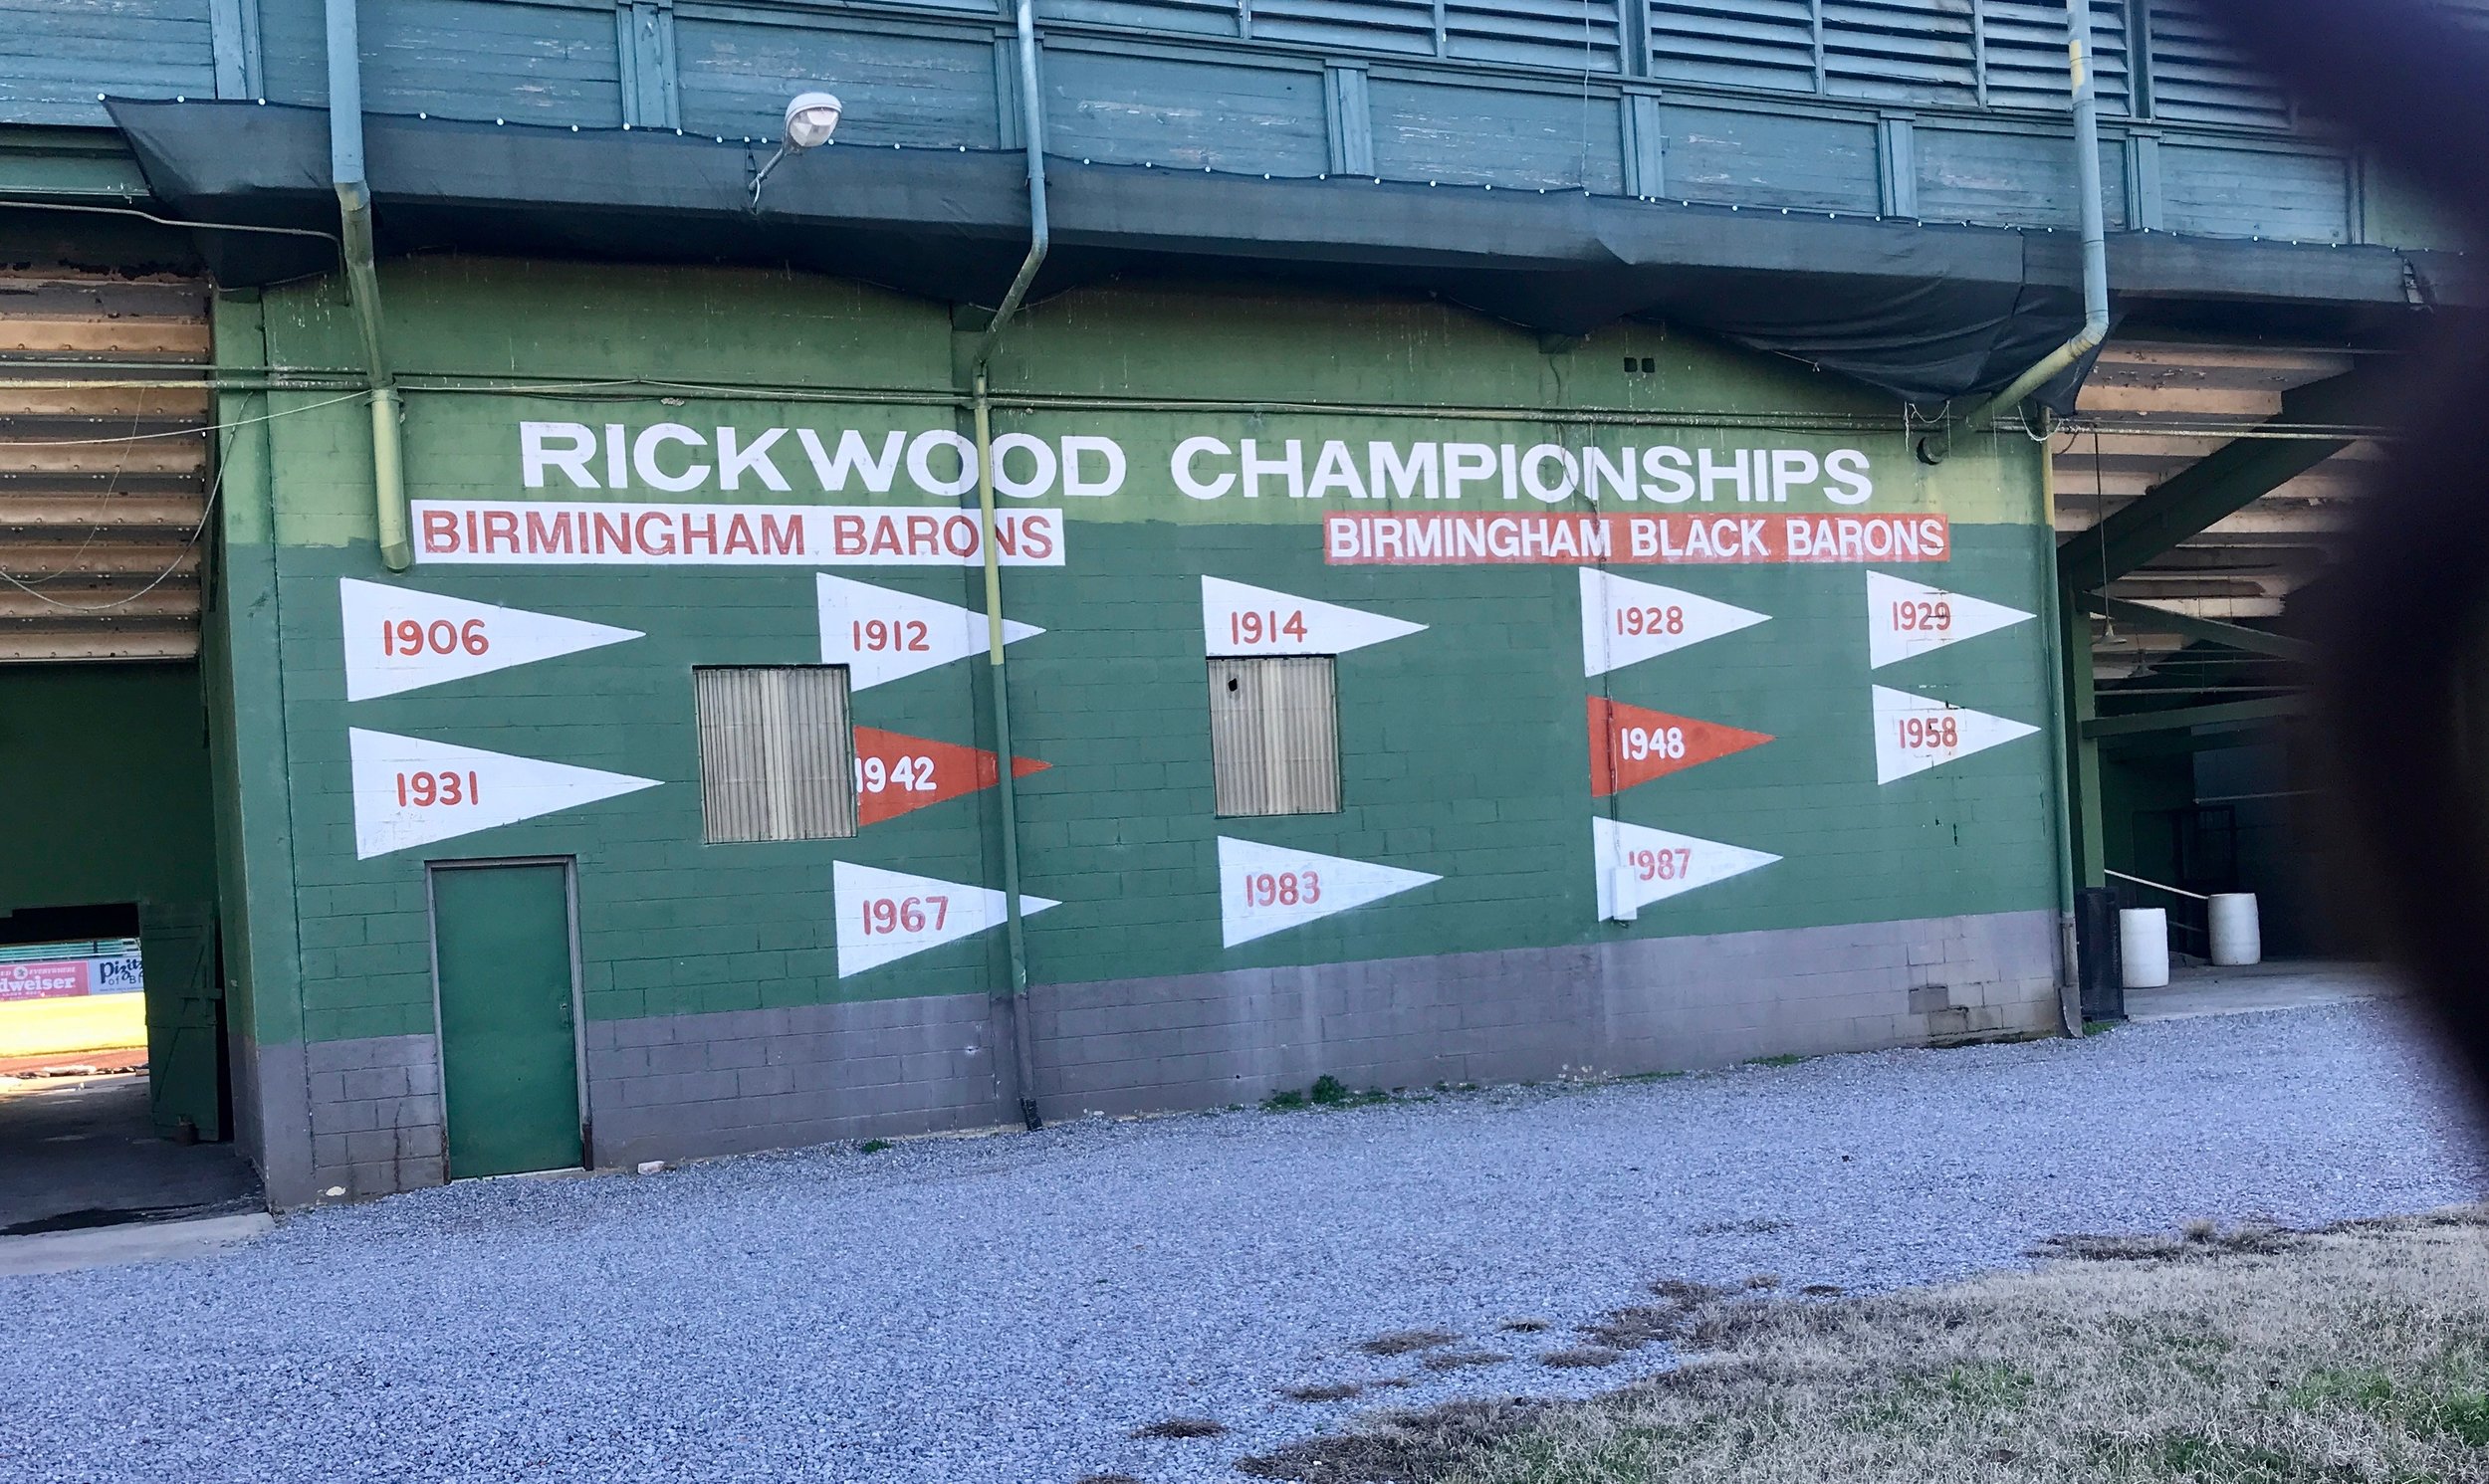  Rickwood Field in Birmingham, said to be the oldest pro baseball field still in existence. 